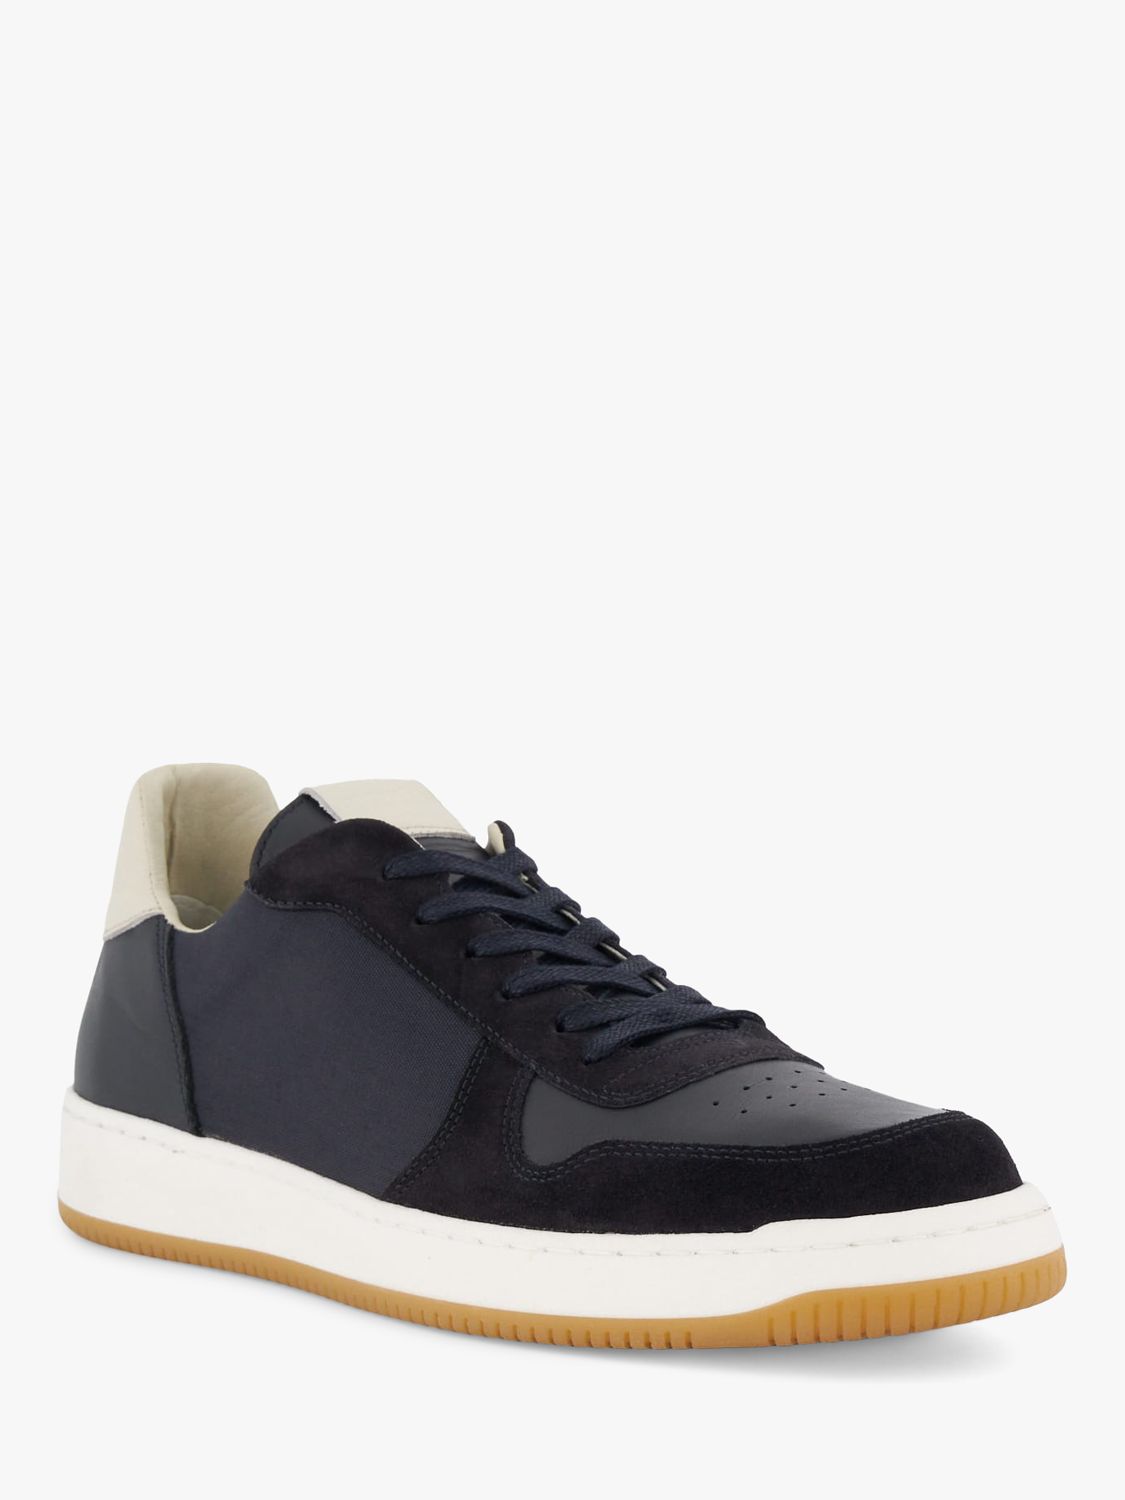 Buy Dune Timon Suede Suede Lace Up Trainers Online at johnlewis.com